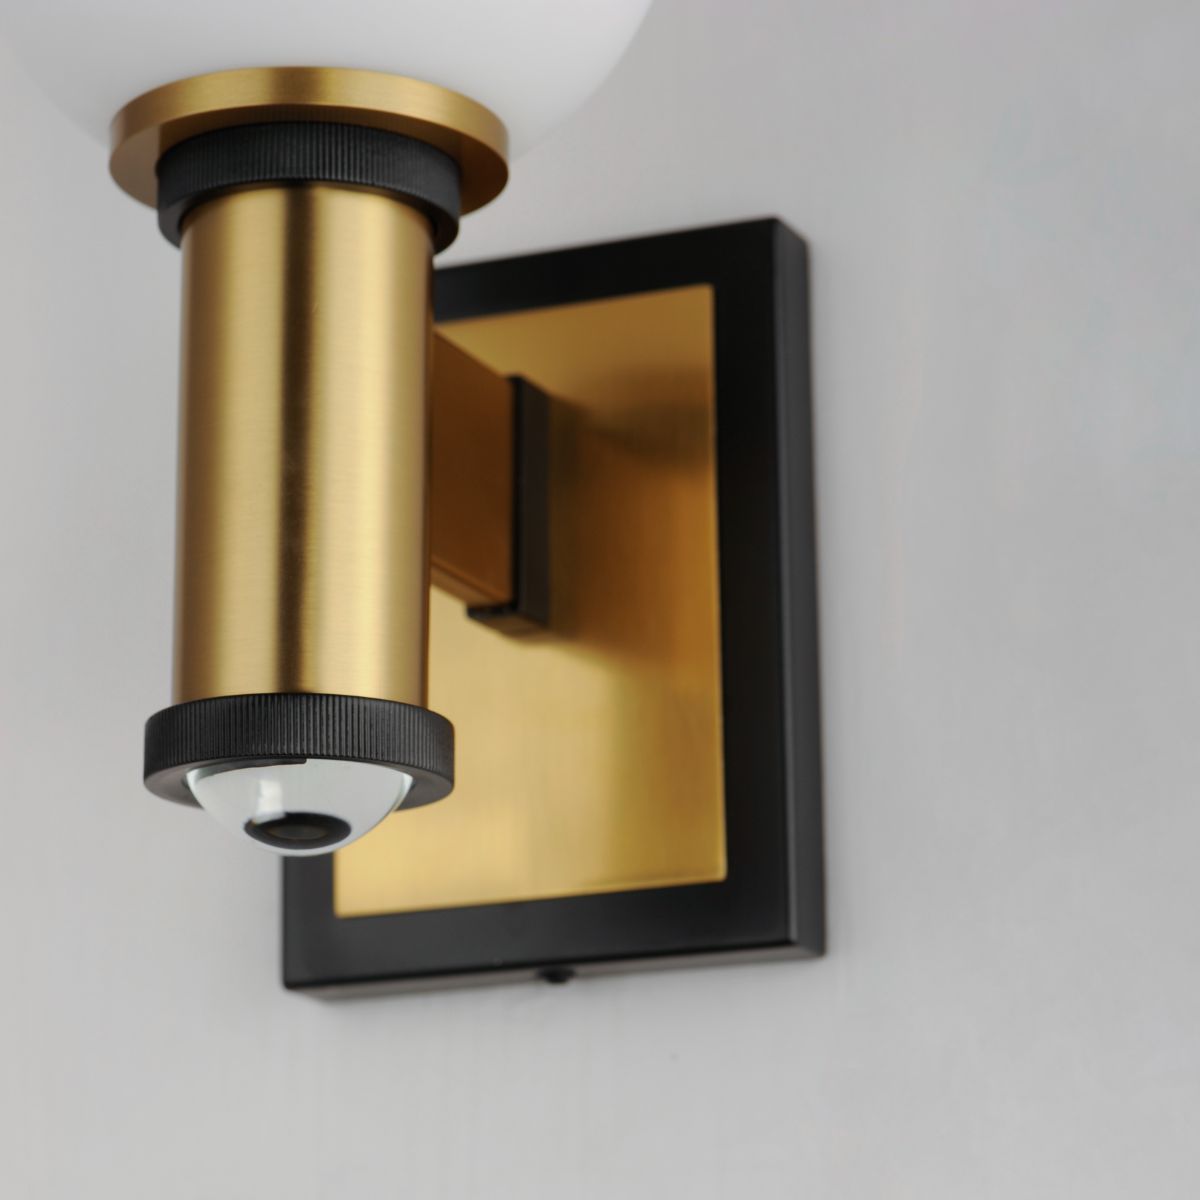 San Simeon 12 in. 2 Lights LED Armed Sconce Black & Antique Brass Finish